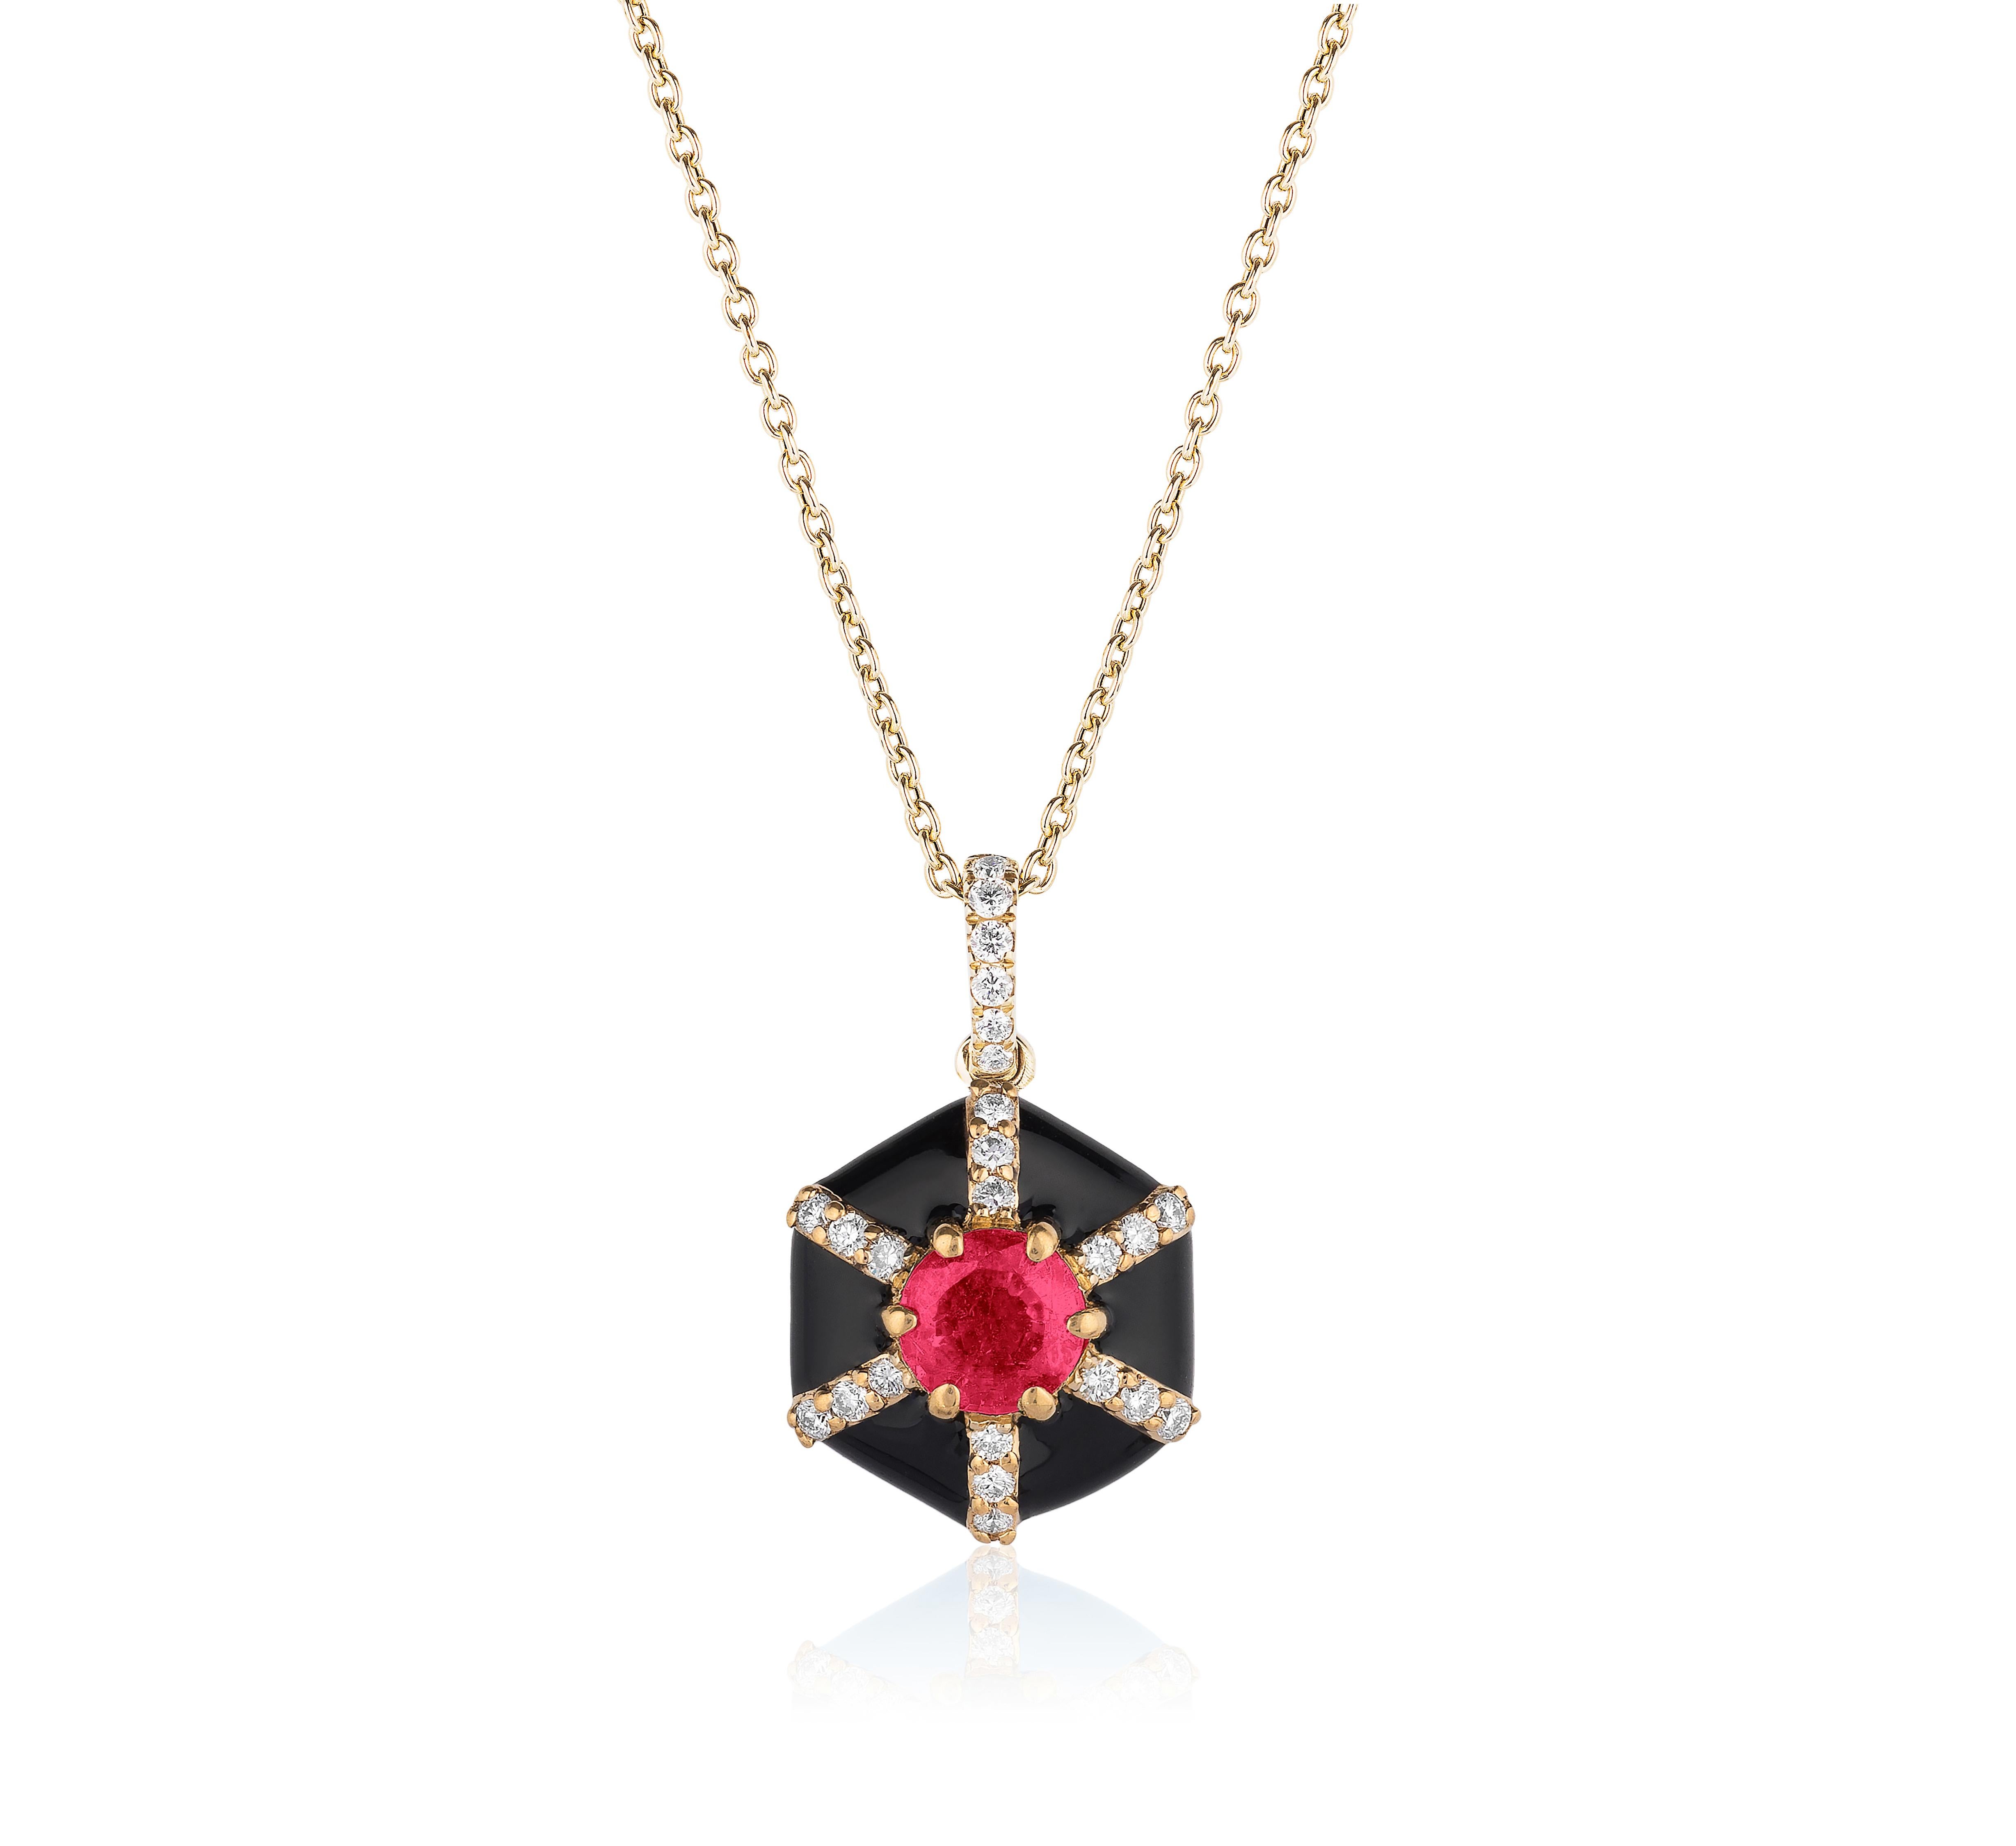 Black Enamel Pendant with Ruby and Diamonds in 18K Yellow Gold. from ‘Queen’ Collection
Stone Size: 4 mm 

Diamonds: G-H / VS, Approx. Wt: 0.10 Carats